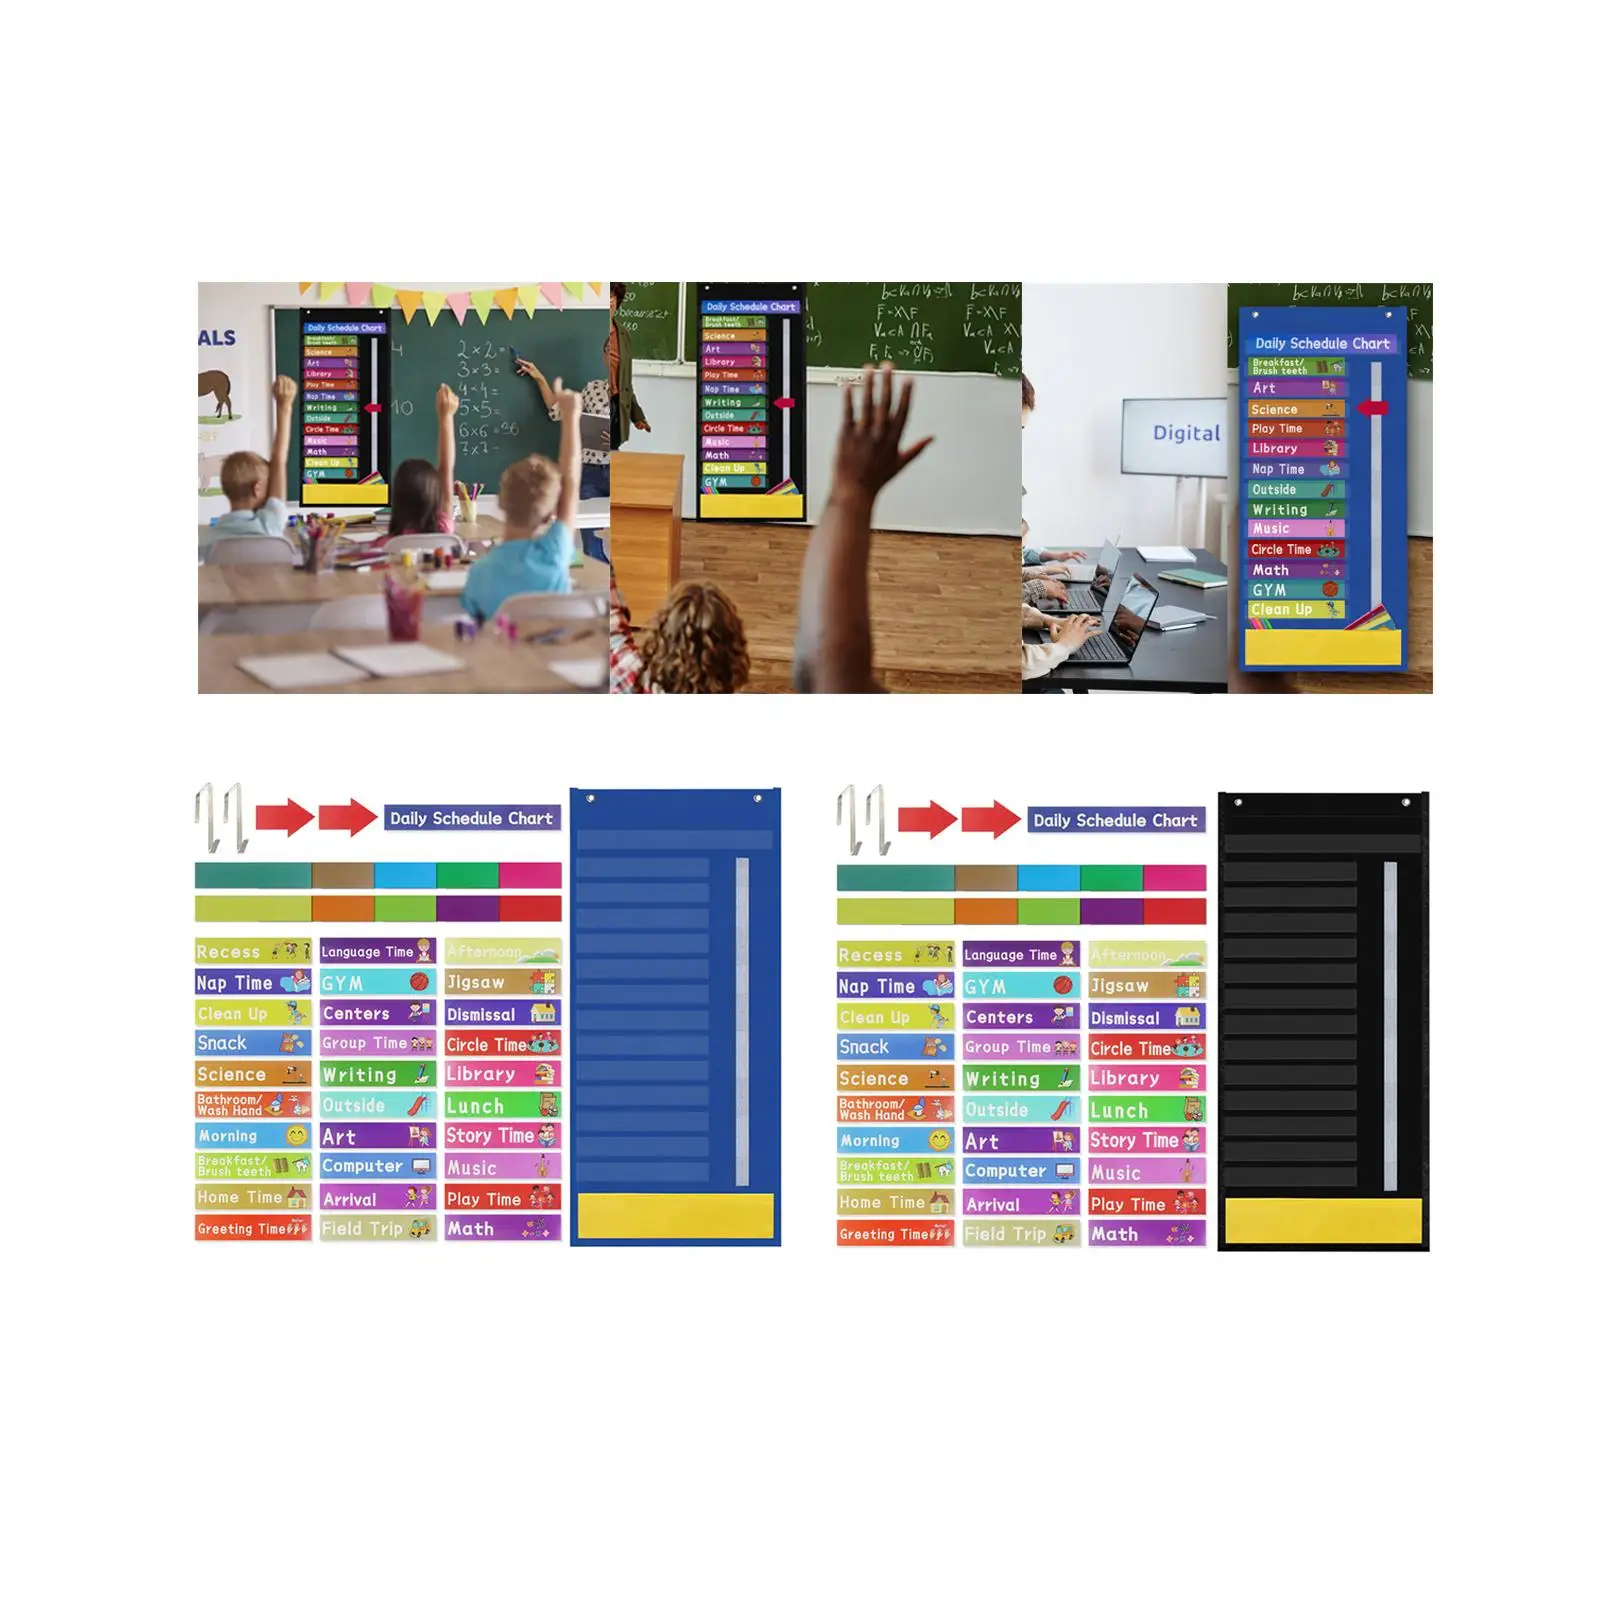 Decorative Schedule Chart Classroom Activities with for Toddlers